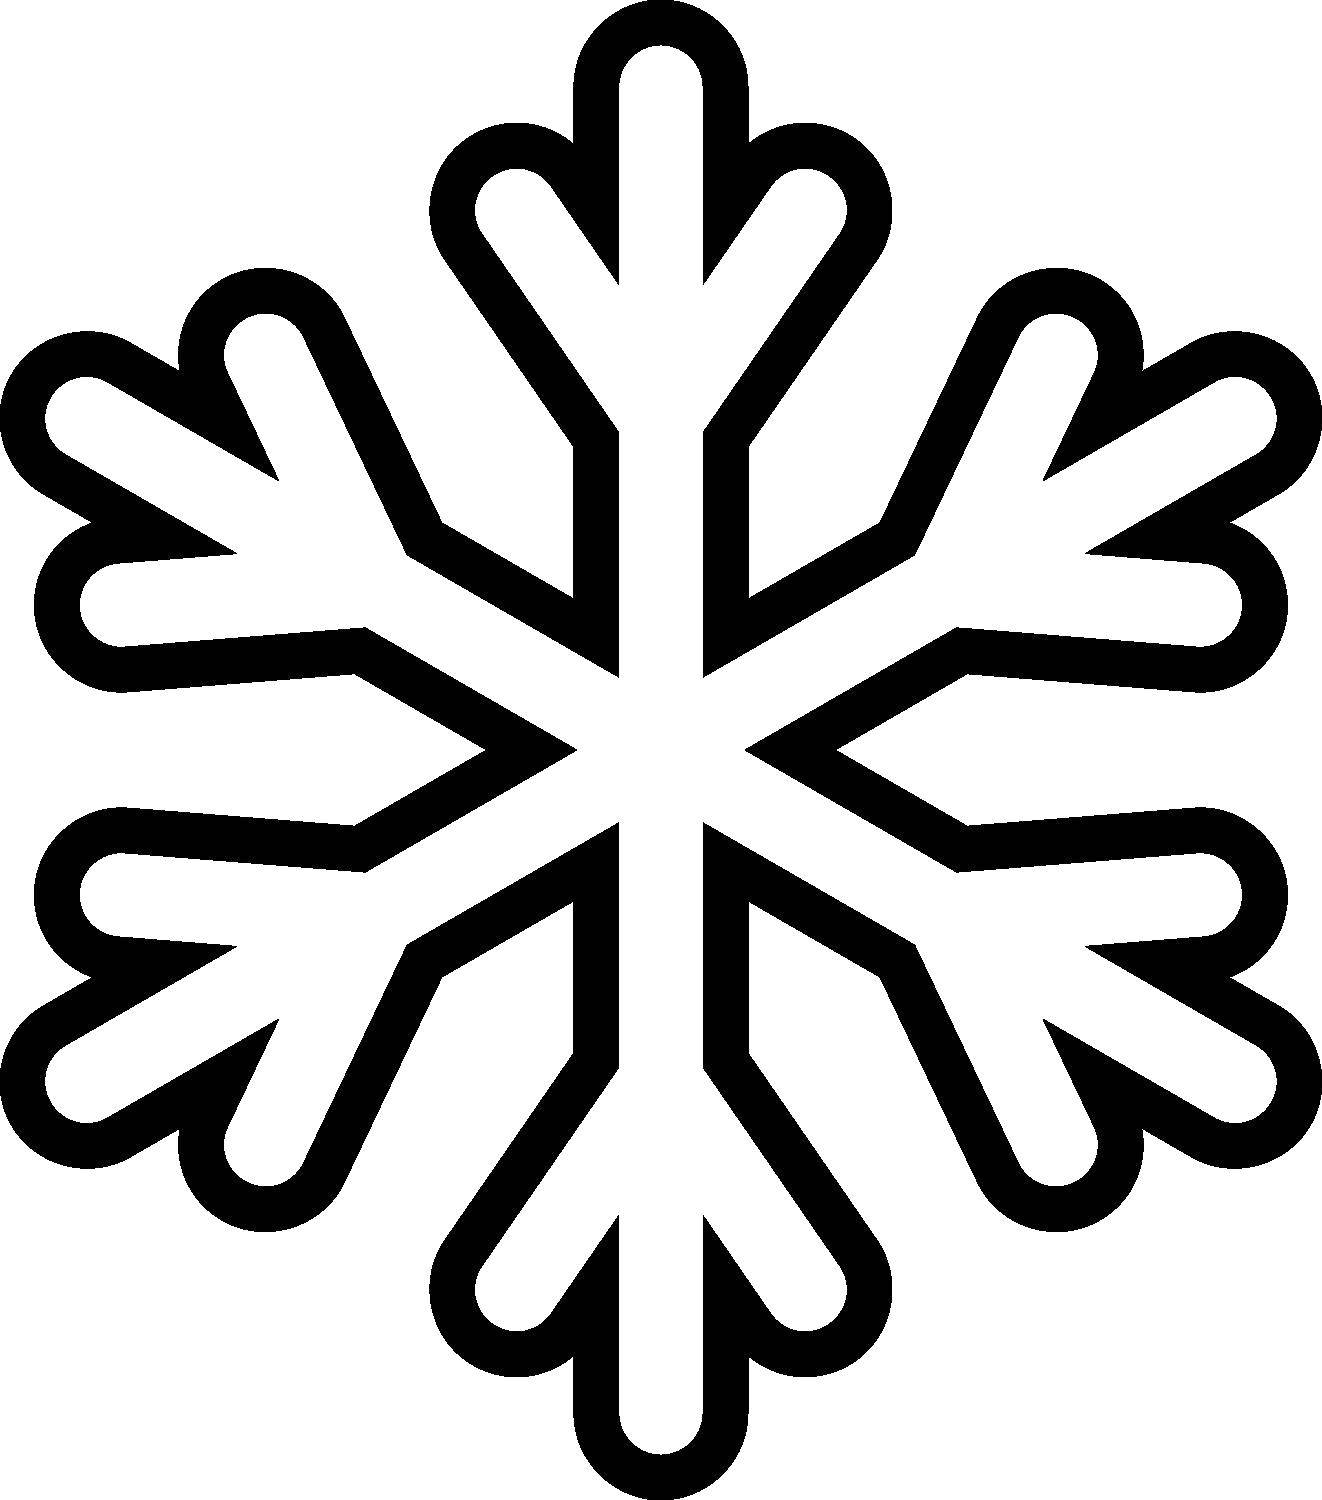 Coloring Slim snowflake. Category The contour snowflakes. Tags:  Snowflakes, snow, winter.